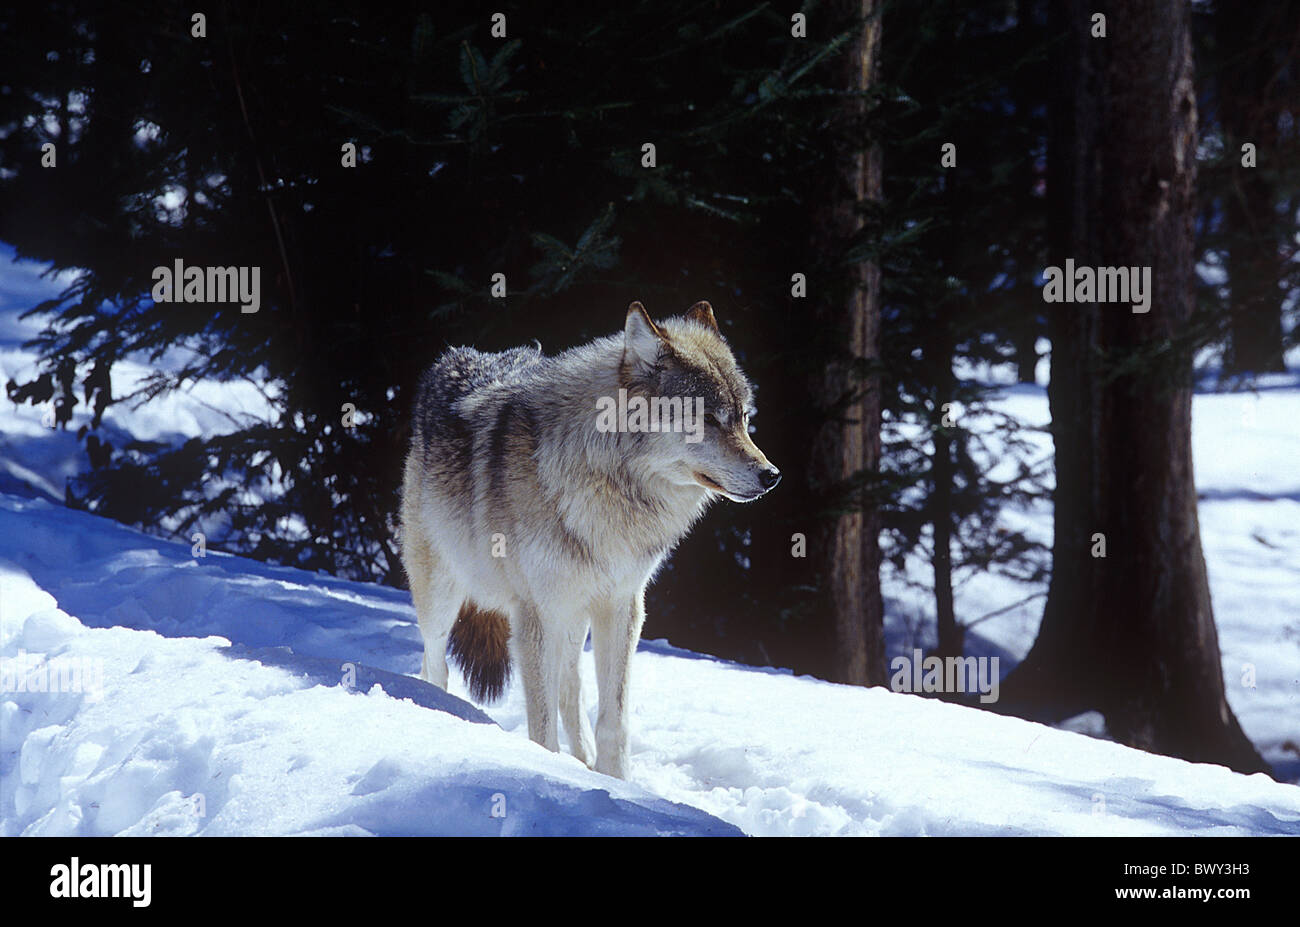 Amos animal animals Canada North America America Canis lupus Province of Quebec Refuge Pageau snow standin Stock Photo